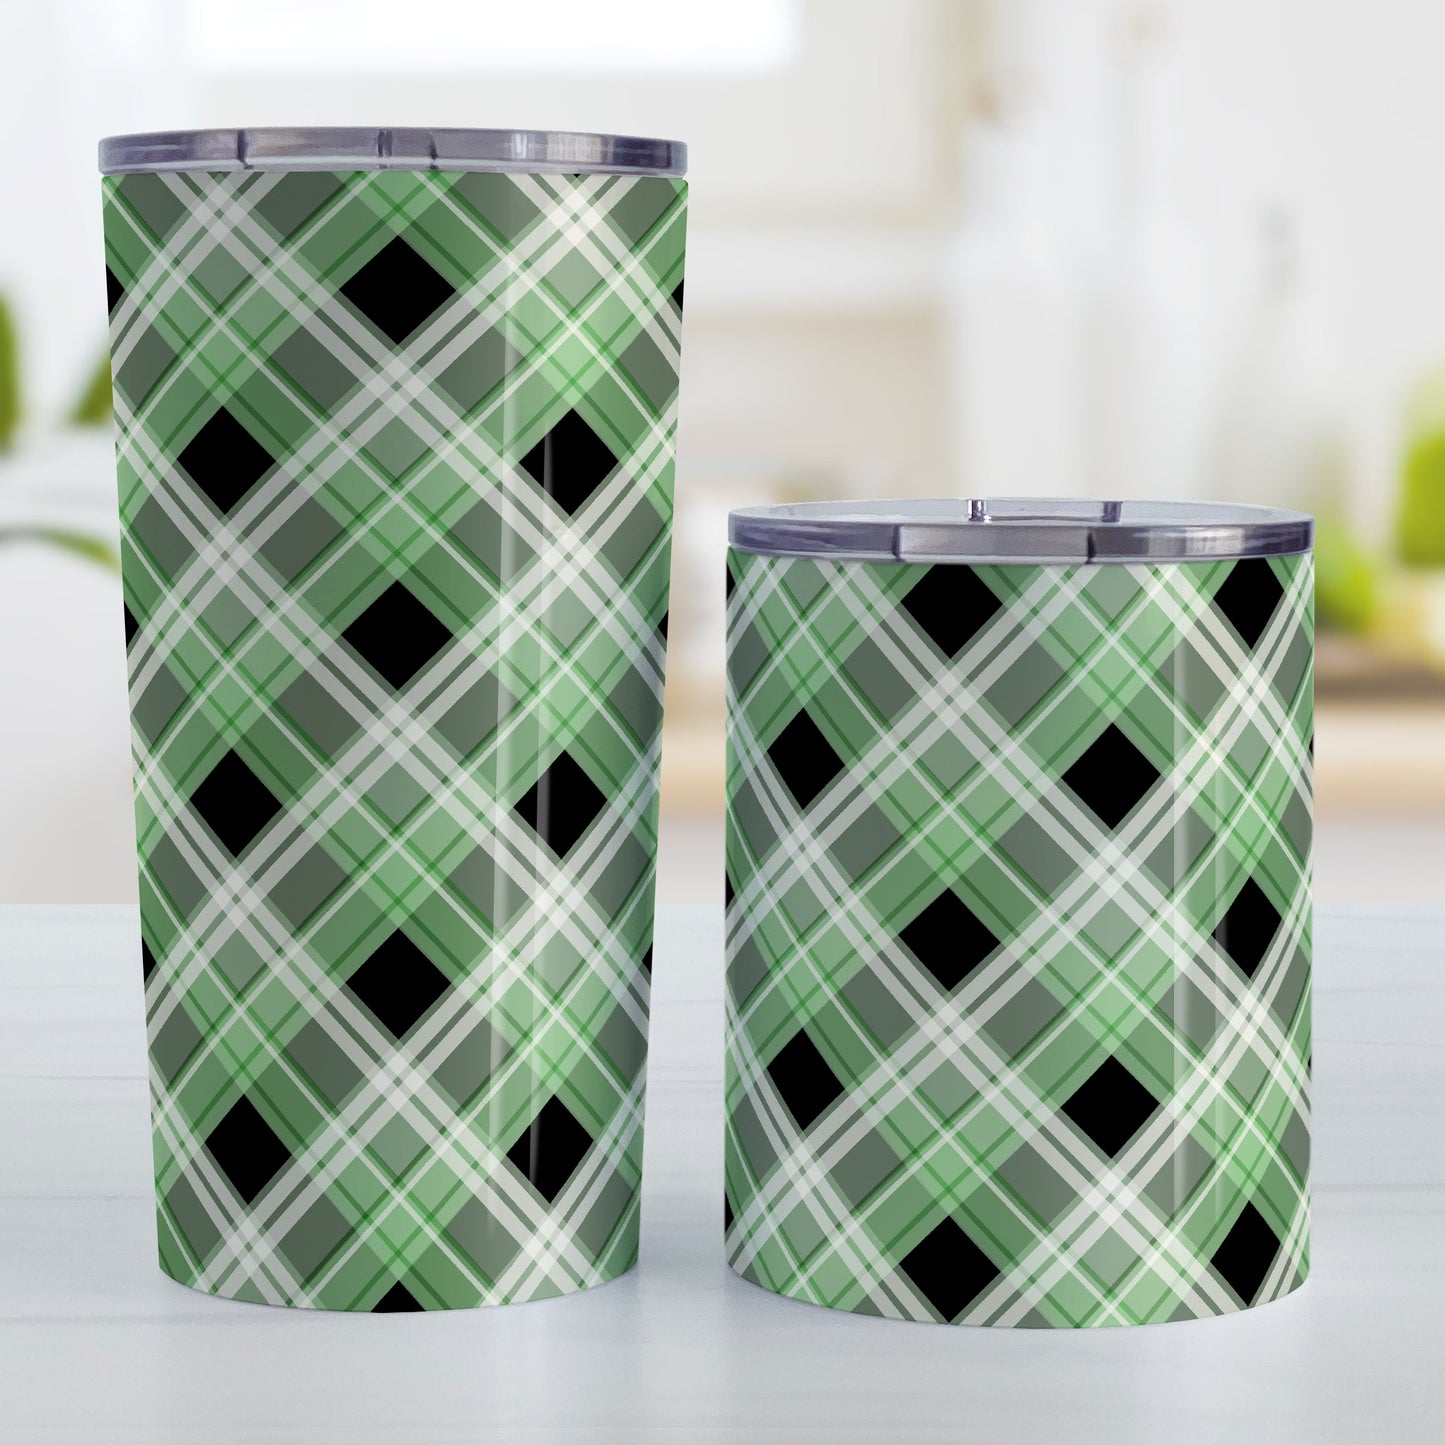 Alternative Black and Green Plaid Tumbler Cup (20oz and 10oz) at Amy's Coffee Mugs. Stainless steel insulated tumbler cups designed with a diagonal green, black, and white plaid pattern that wraps around the cups. Tumbler cups designed for someone who loves plaid patterns and the colors green and black together. Photo shows both sized cups next to each other.